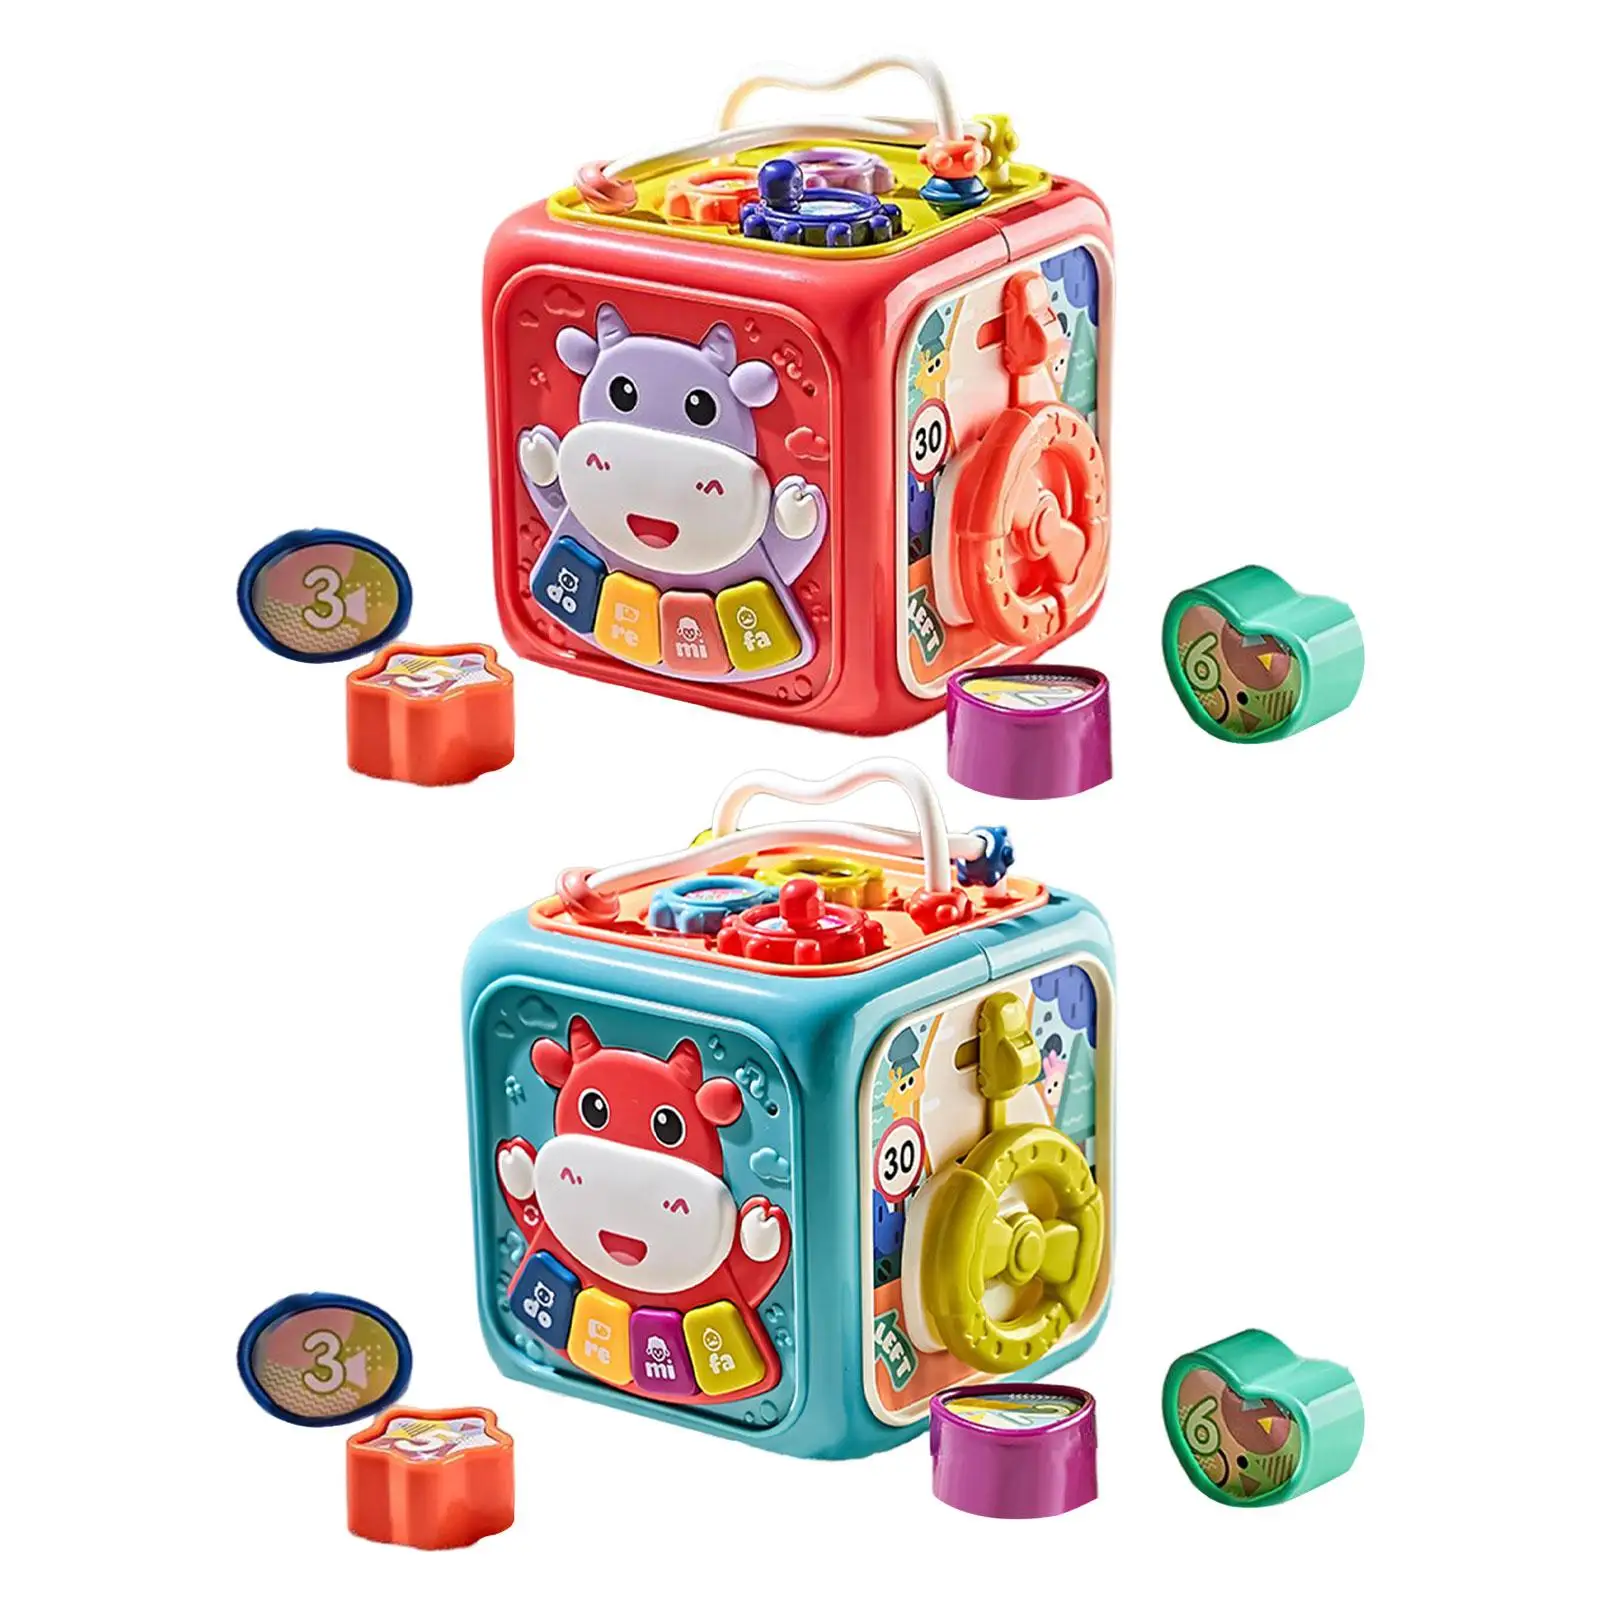 Baby Musical Toys Development Baby Activity Cube Toy 6 Sided Activity Center for Age 1 + Year Old Boys Girls Kids Birthday Gift